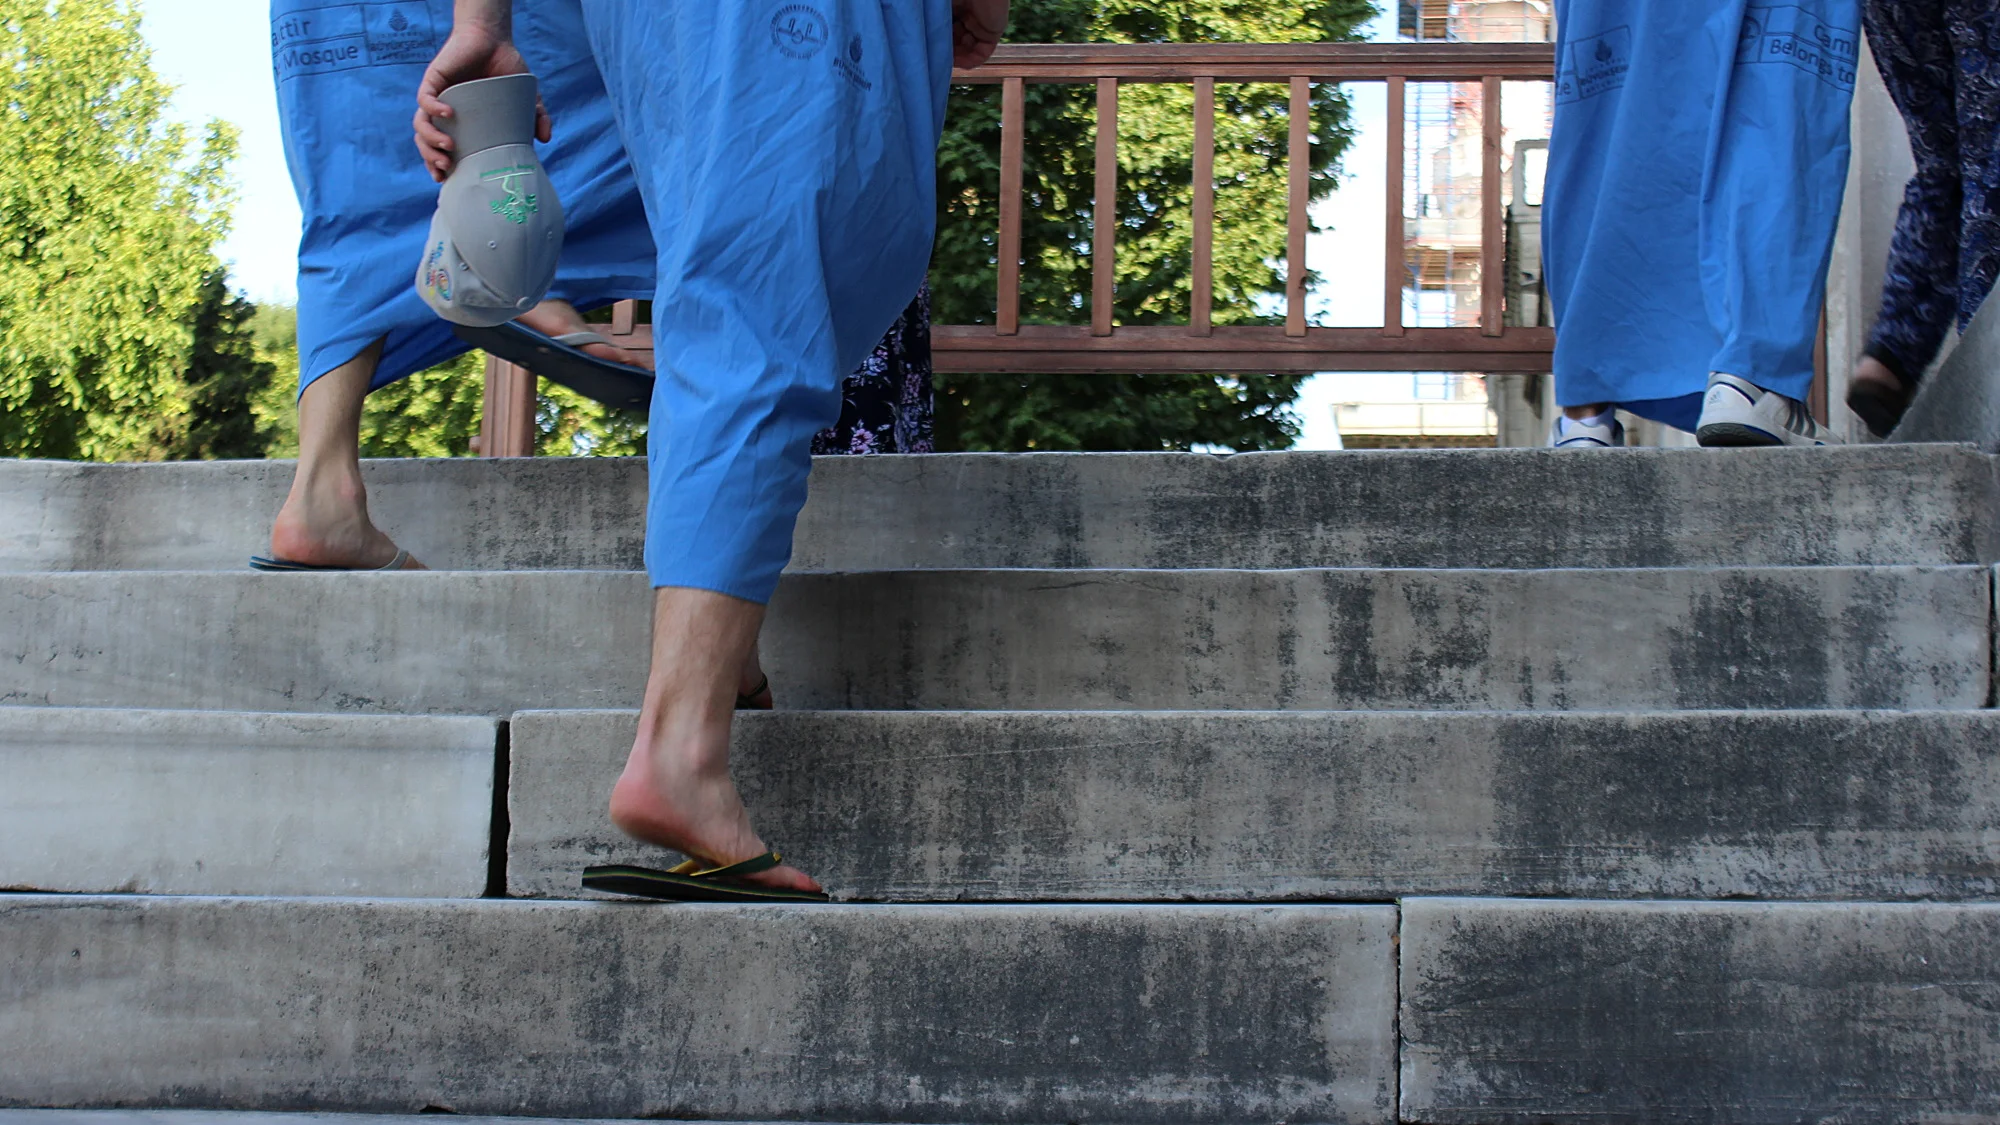 Entering blue mosque without shoes and shorts with blue dresses.